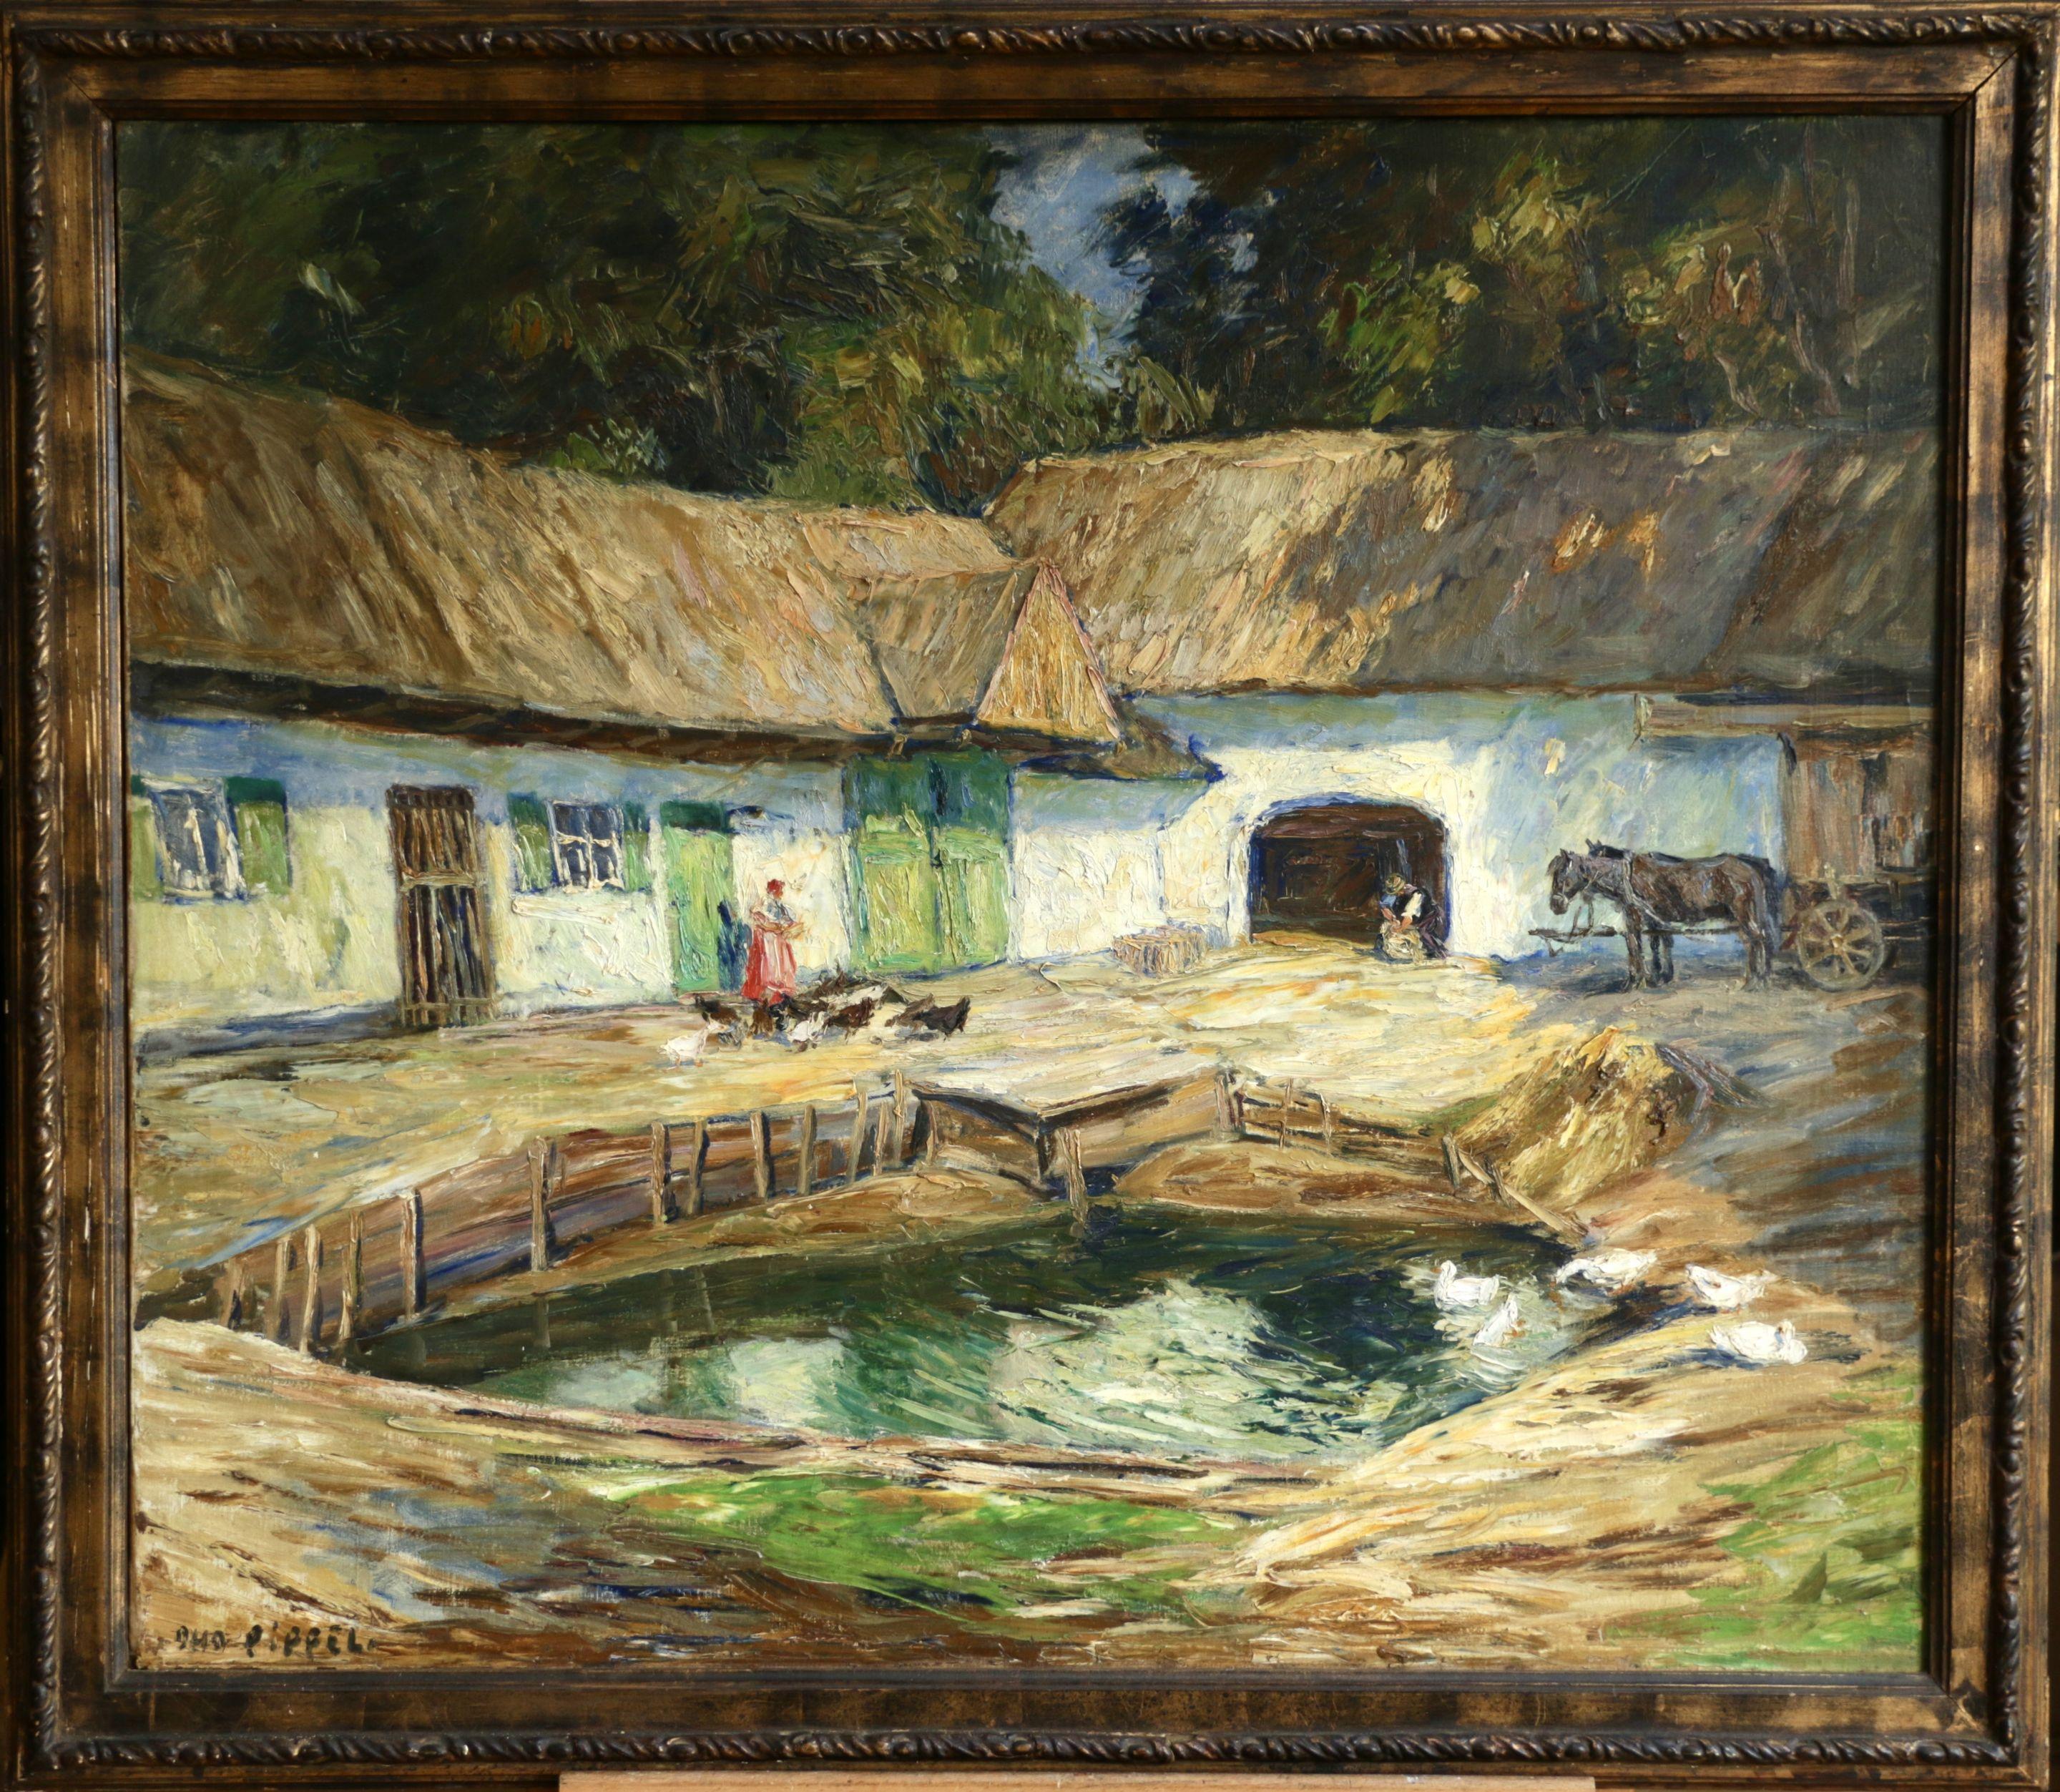 Alte Bauernhof - 20th Century Oil, Figure & Animals in Farmyard by O E Pippel - Post-Impressionist Painting by Otto Eduard Pippel